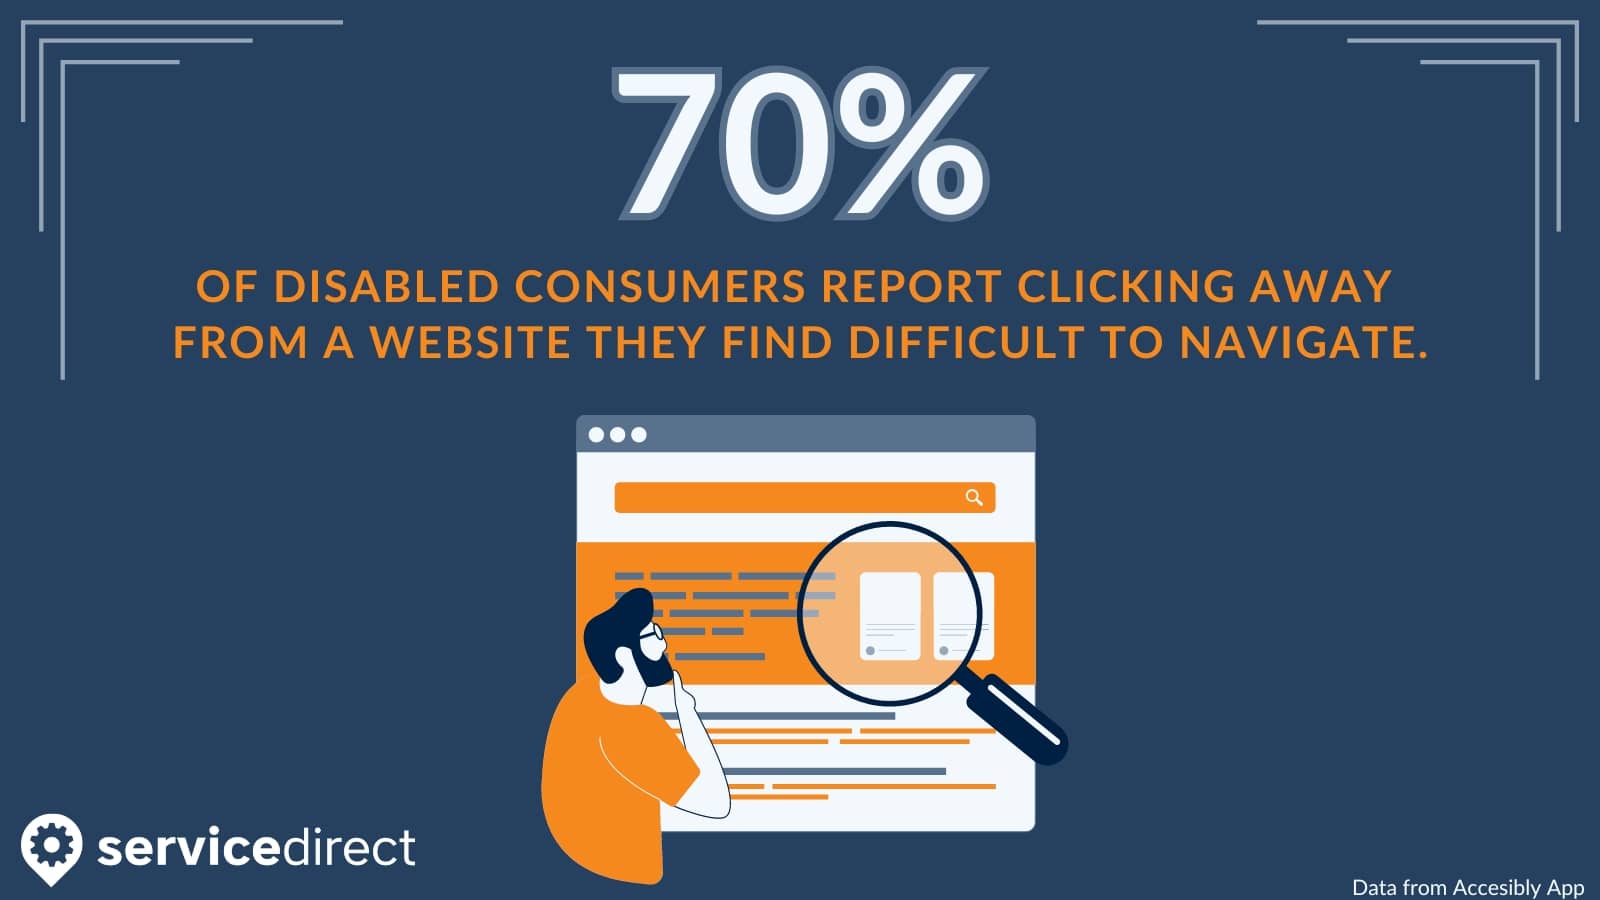 70% of Consumers Click Away from a website that is difficult to navigate